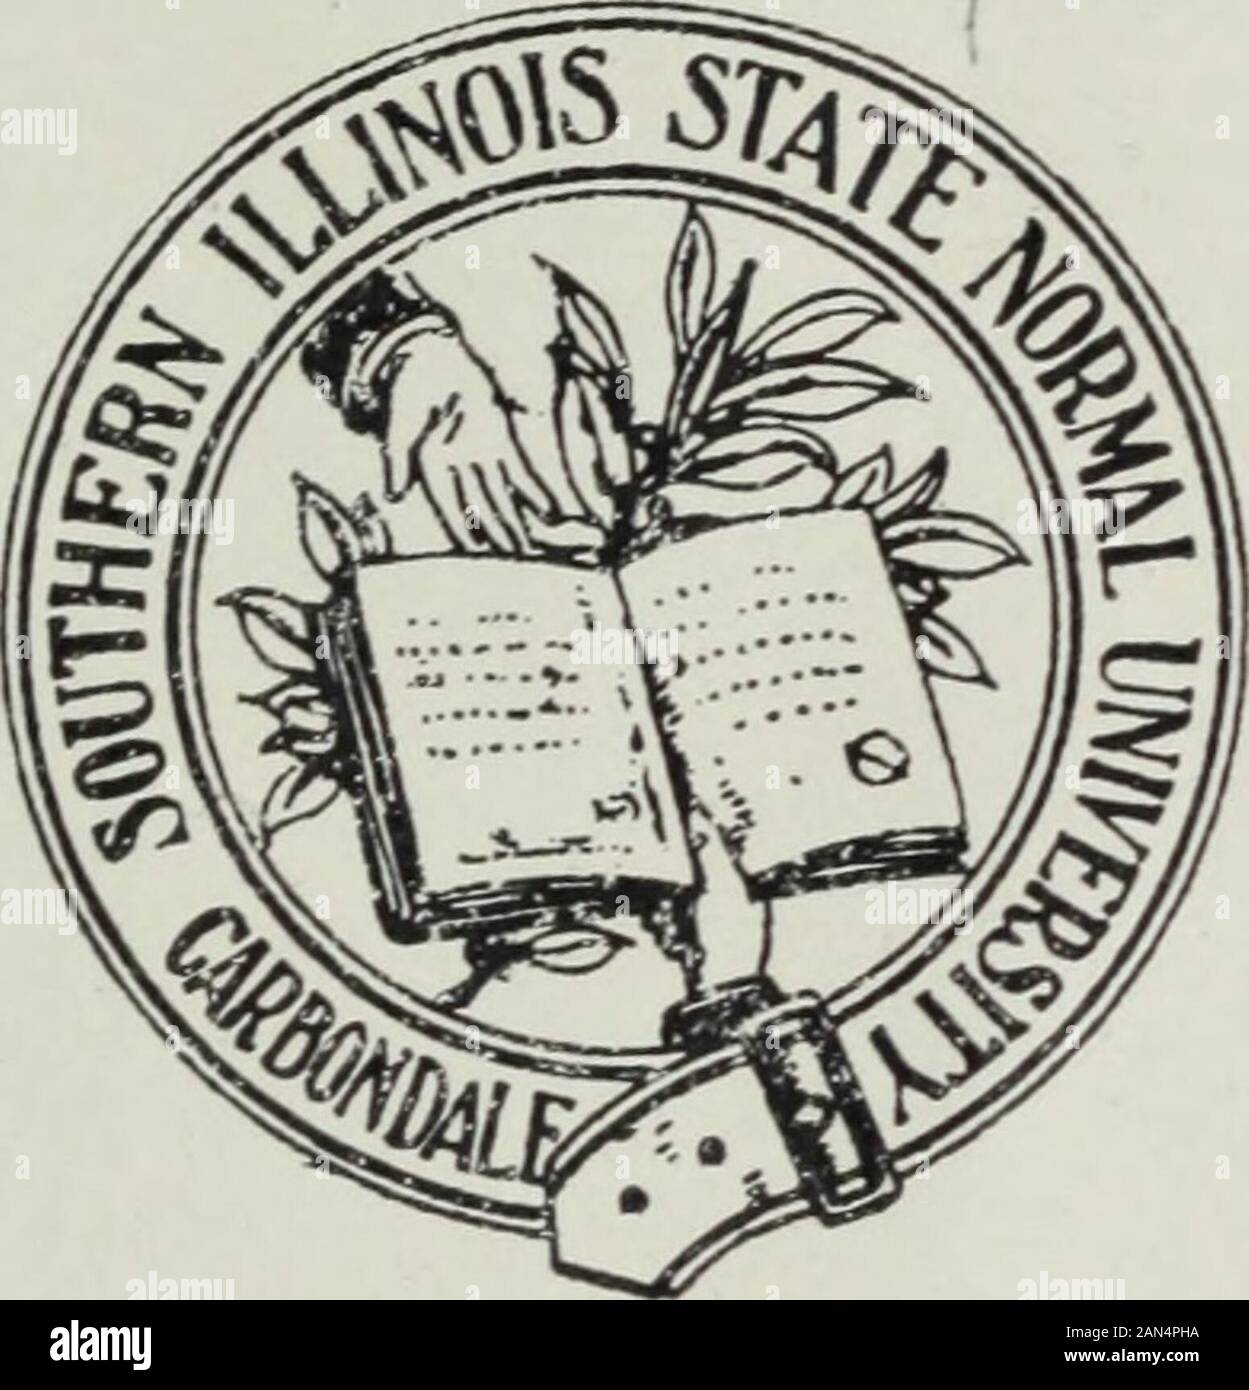 Annual catalogue of the Southern Illinois Normal University, Carbondale, Jackson County, Illinois, 1875-1892 . ANNOUNCEMENTS FOR1908-1909 PUBLISHED QUARTERLY BY THE UNIVERSITY.January, April. July, October Entered as second class matter March 27, 1907 at the postofflce atCarbondale. Illinois, under the Act of Congress of July 16, 1894. ? ,c f t c c t f • « TRUSTEES. F. C. Vandervort, M. D., President, Bloomington. Hon. Francis G. Blair, Ex-Officio, Springfield. Hugh Lauder, Secretary, Carbondale. W. S. Phillips, Ridgway.J. M. Burkhart, Marion.W. F. Bundy, Centralia. Treasurer, E. K. Porter, Ca Stock Photo